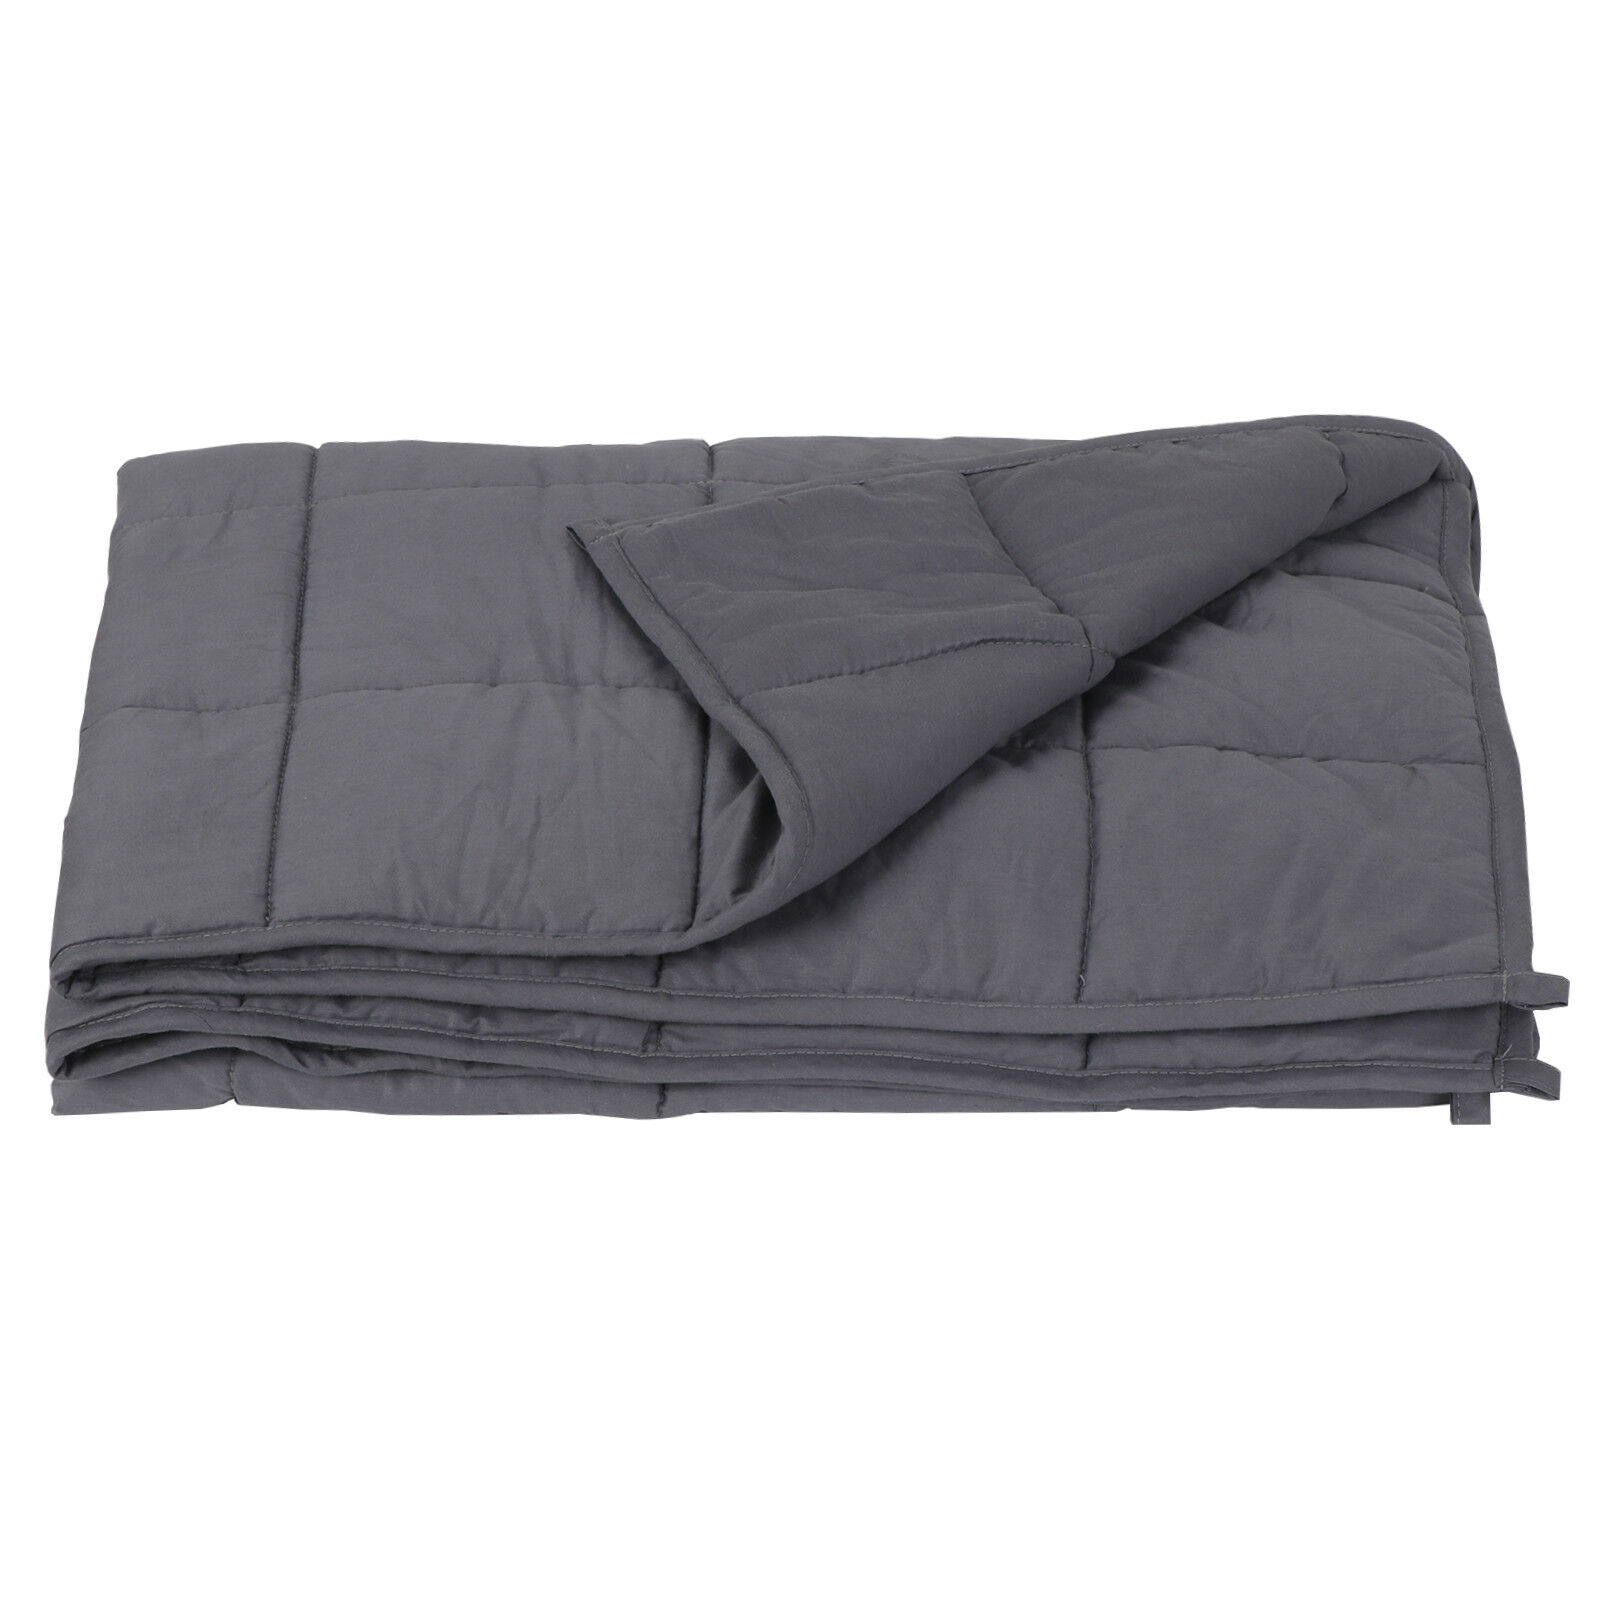 60" X80" Weighted Blanket  Full Queen Size Reduce Stress Promote Deep Sleep 20lb